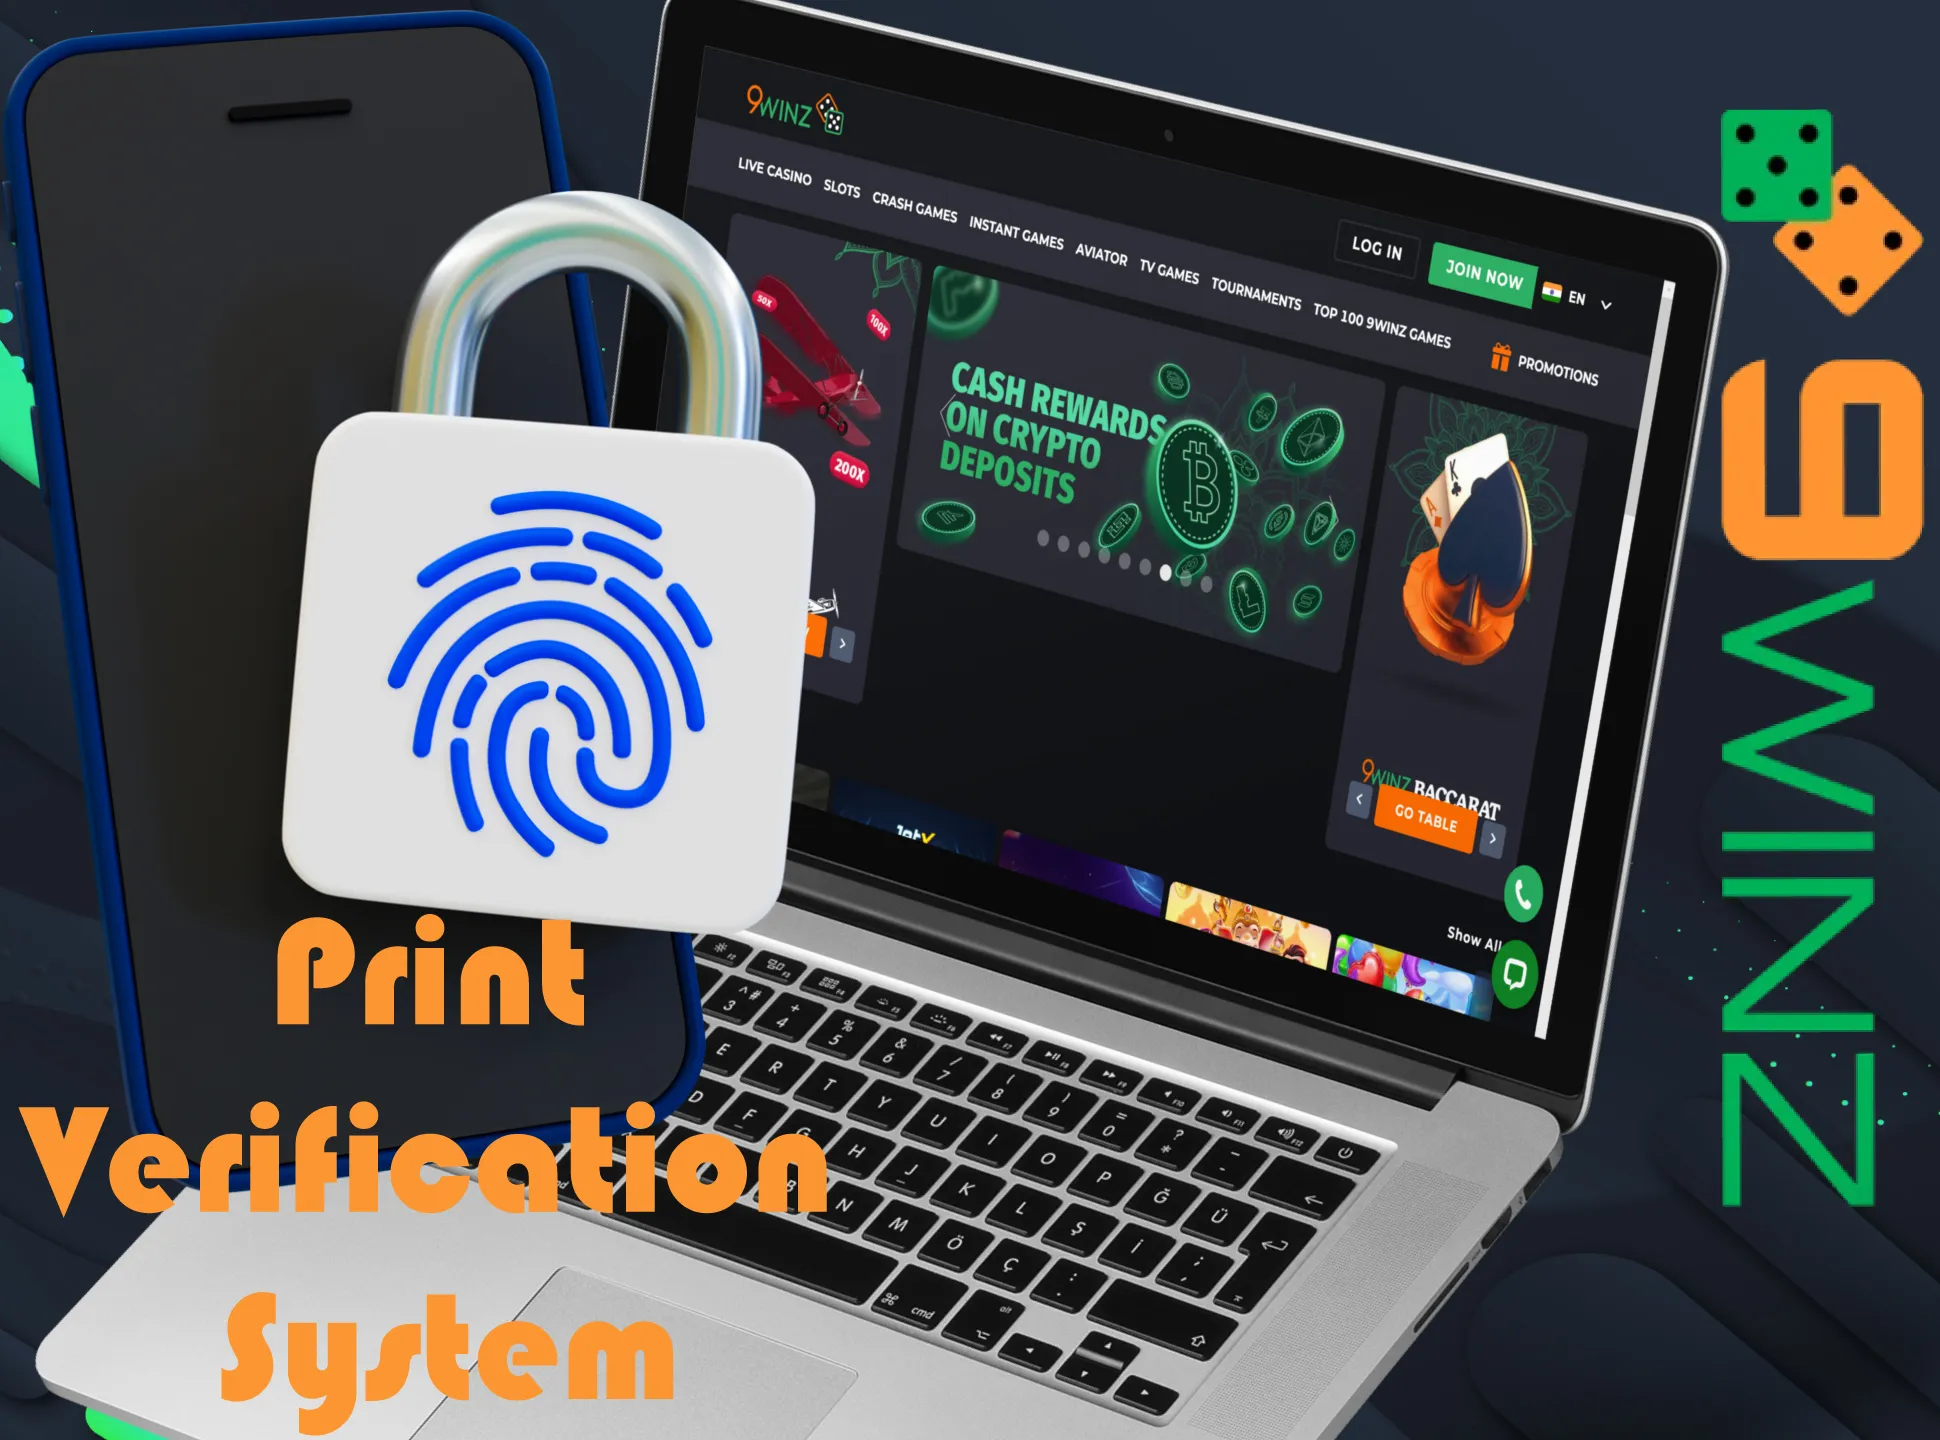 9winz has connected print verification system.